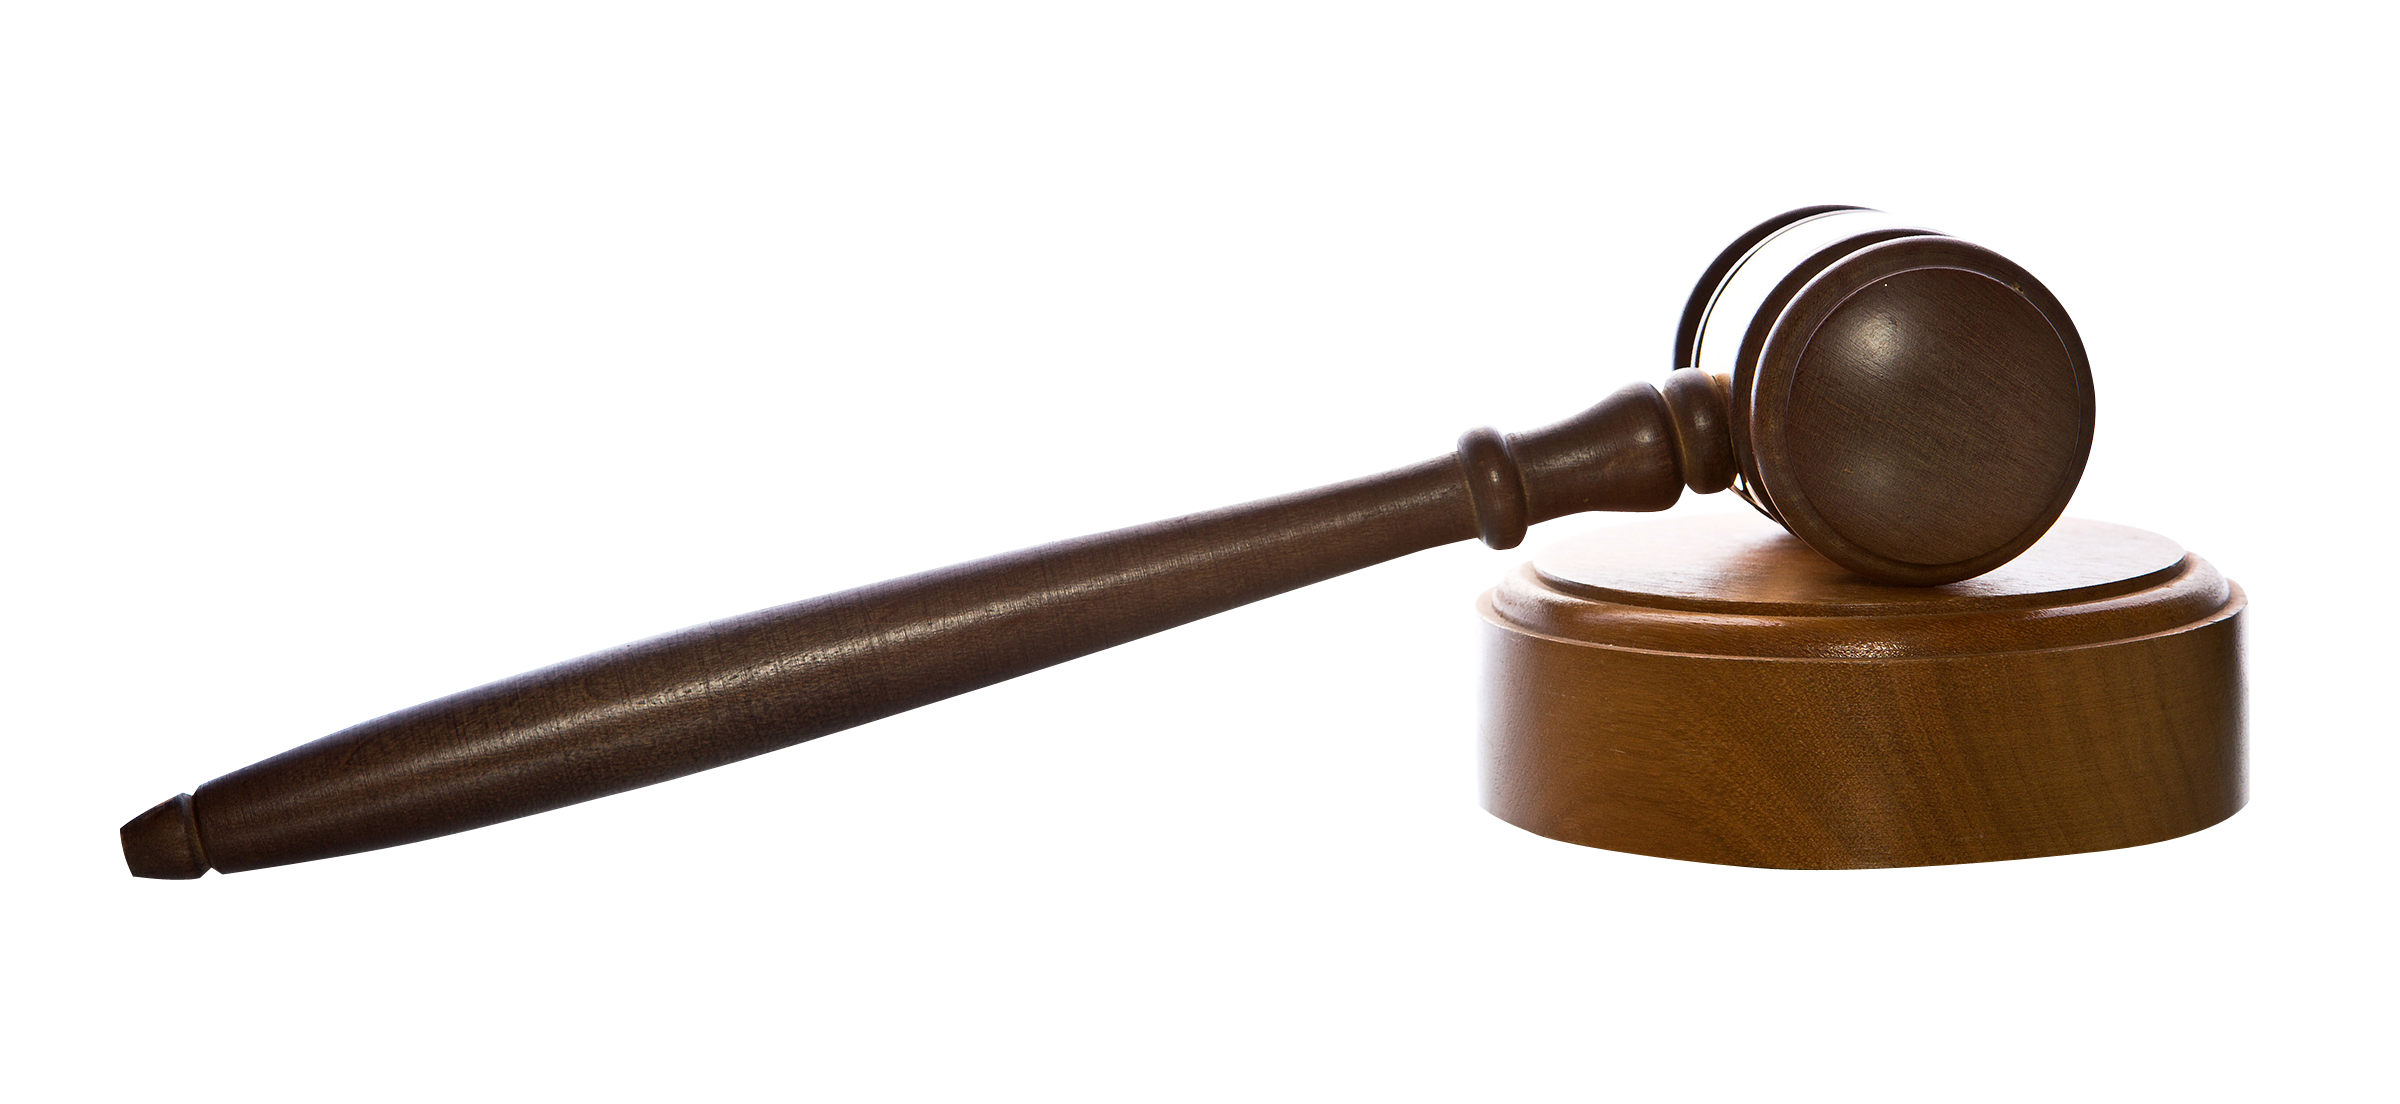 Gavel Png Image With Transparent Background - Gavel, Transparent background PNG HD thumbnail